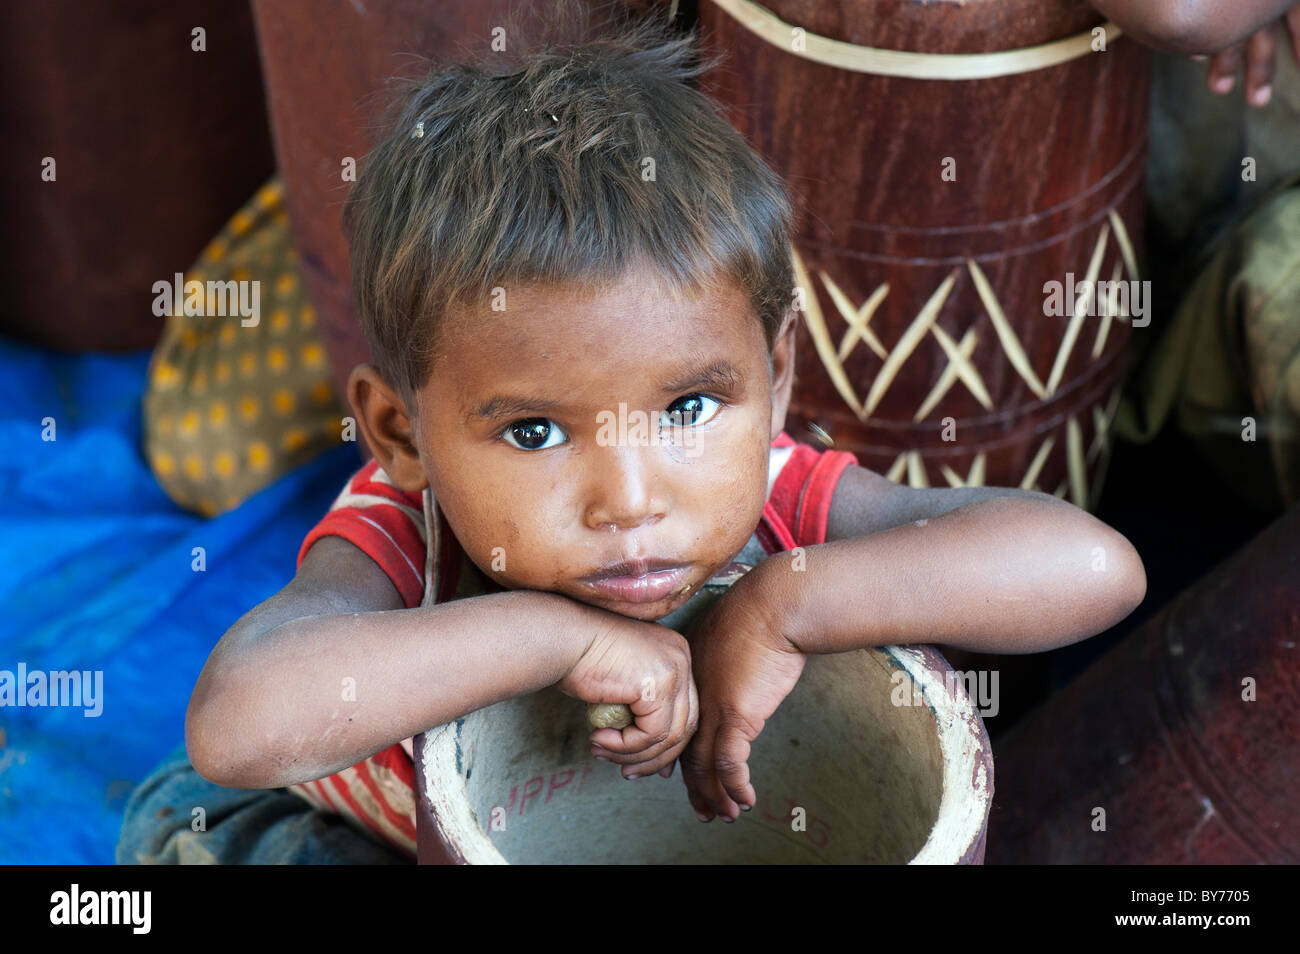 Young poor lower caste Indian street baby boy from Utter Pradesh leaning on half made drums. The drum makers children. Stock Photo